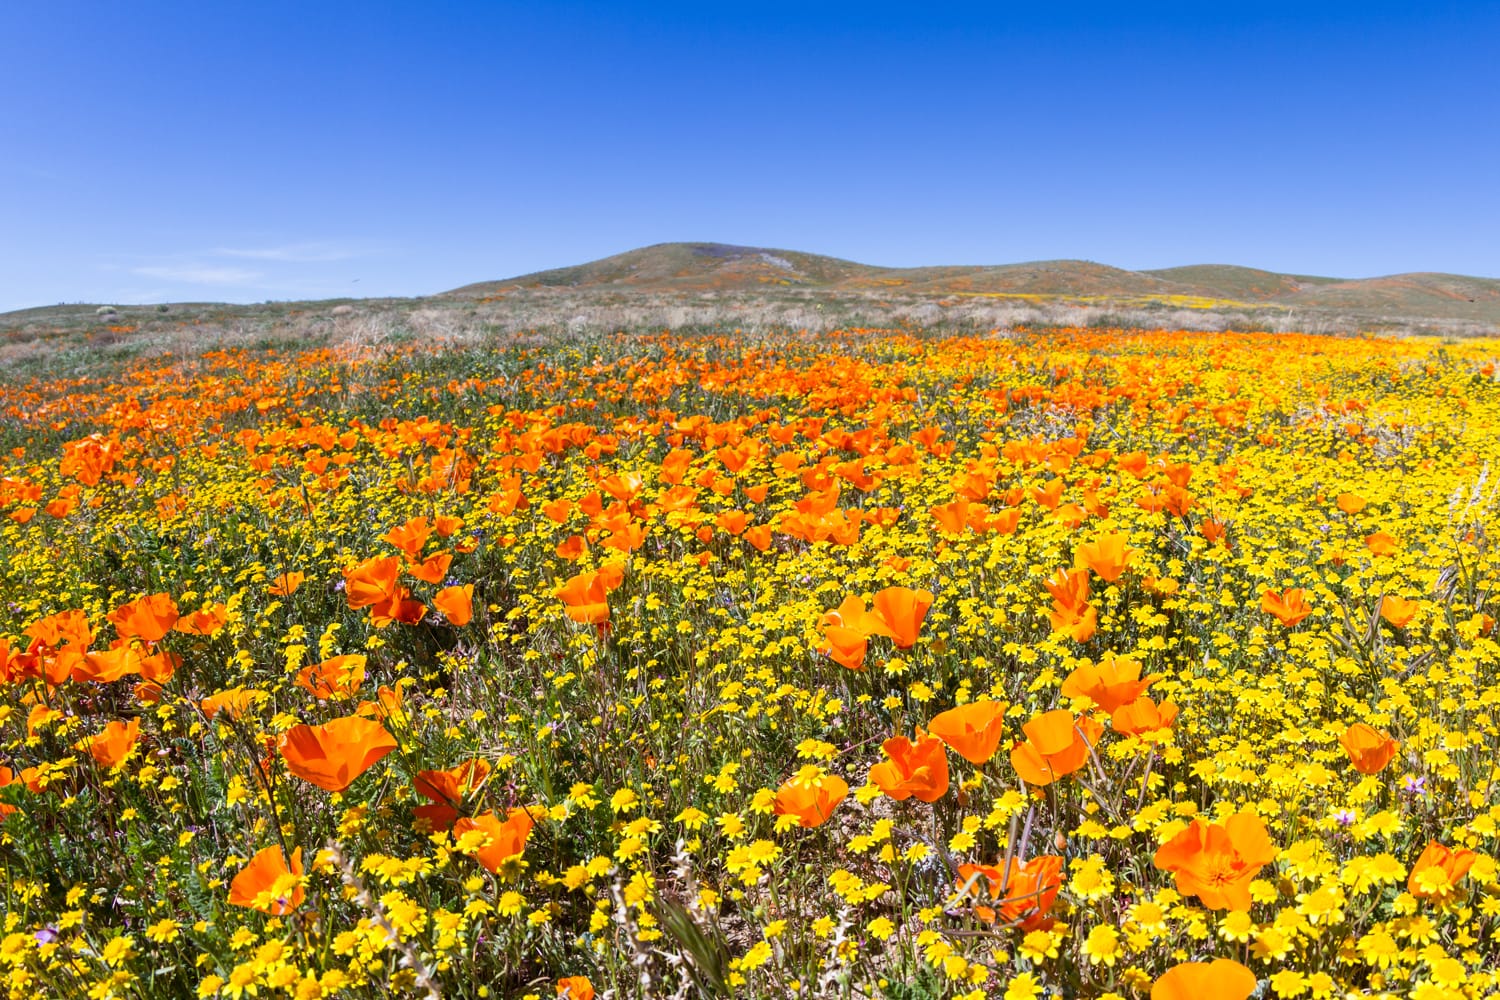 Springtime in California, thousands of flowers blooming on the hills of the Antelope Valley California